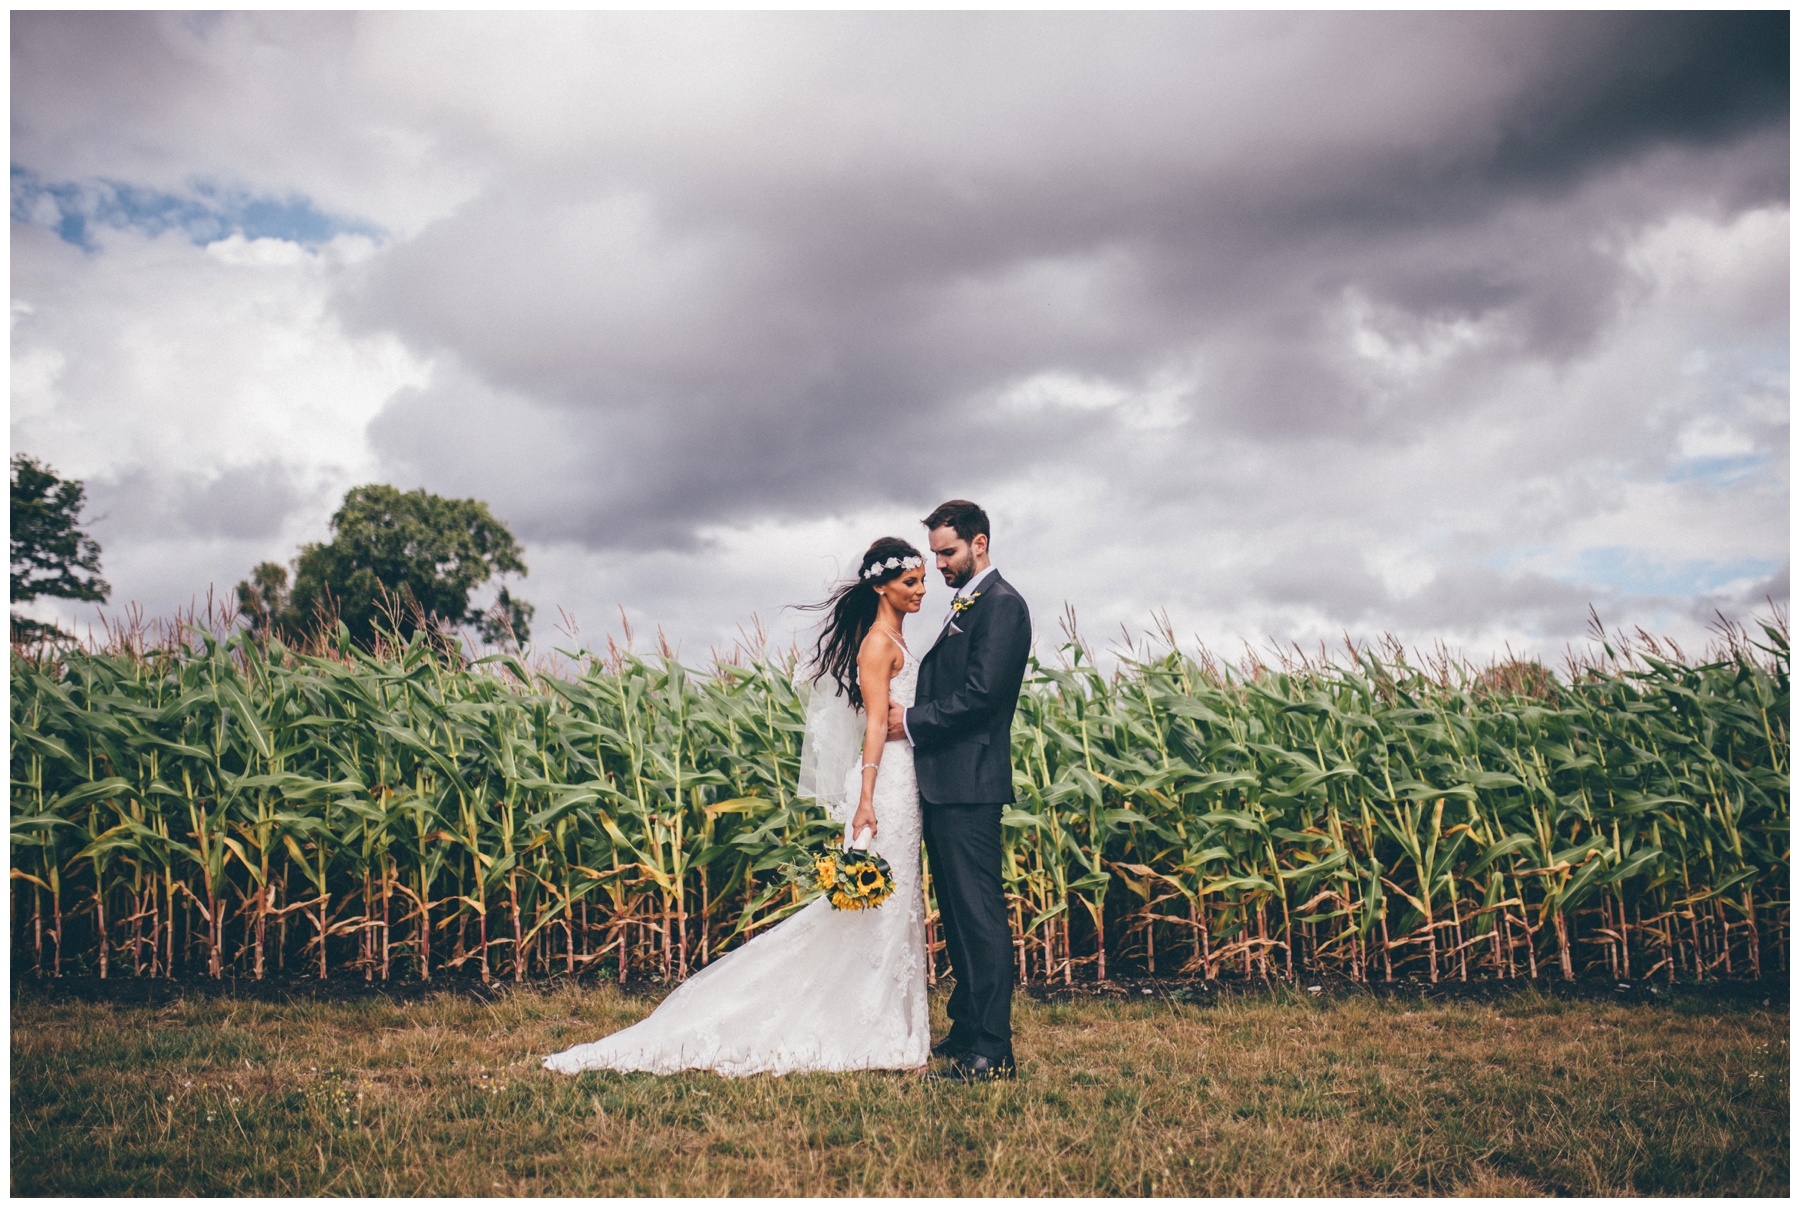 Bride and groom have their wedding photographs taken in a corn field at Sandhole Oak Barn in Cheshire.